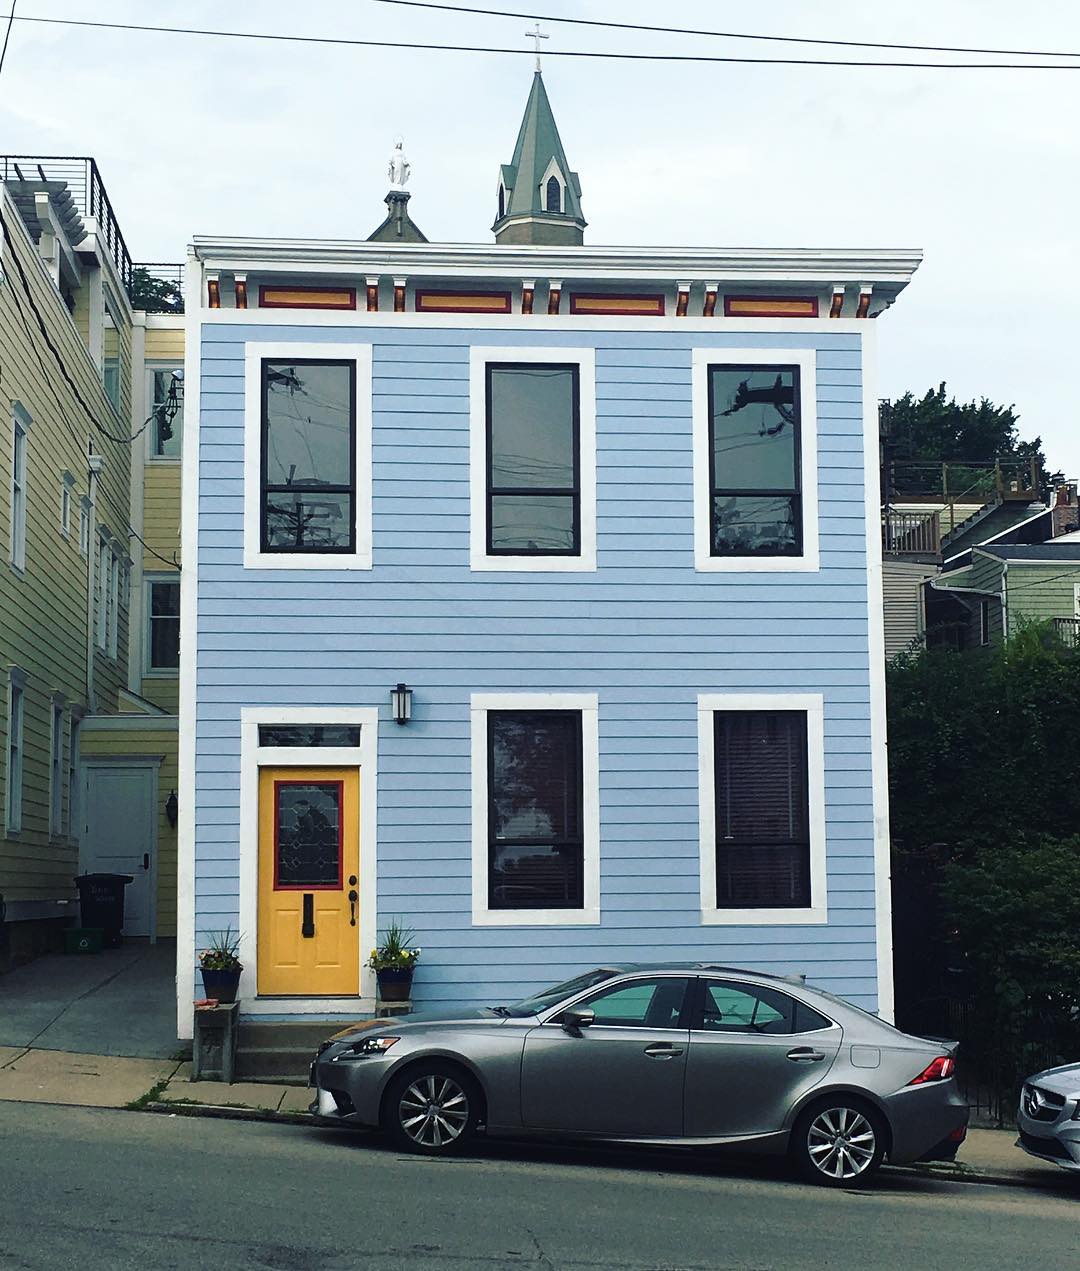 Two story blue home with yellow story in Cincinnati. Photo by Instagram user @takeintheview_